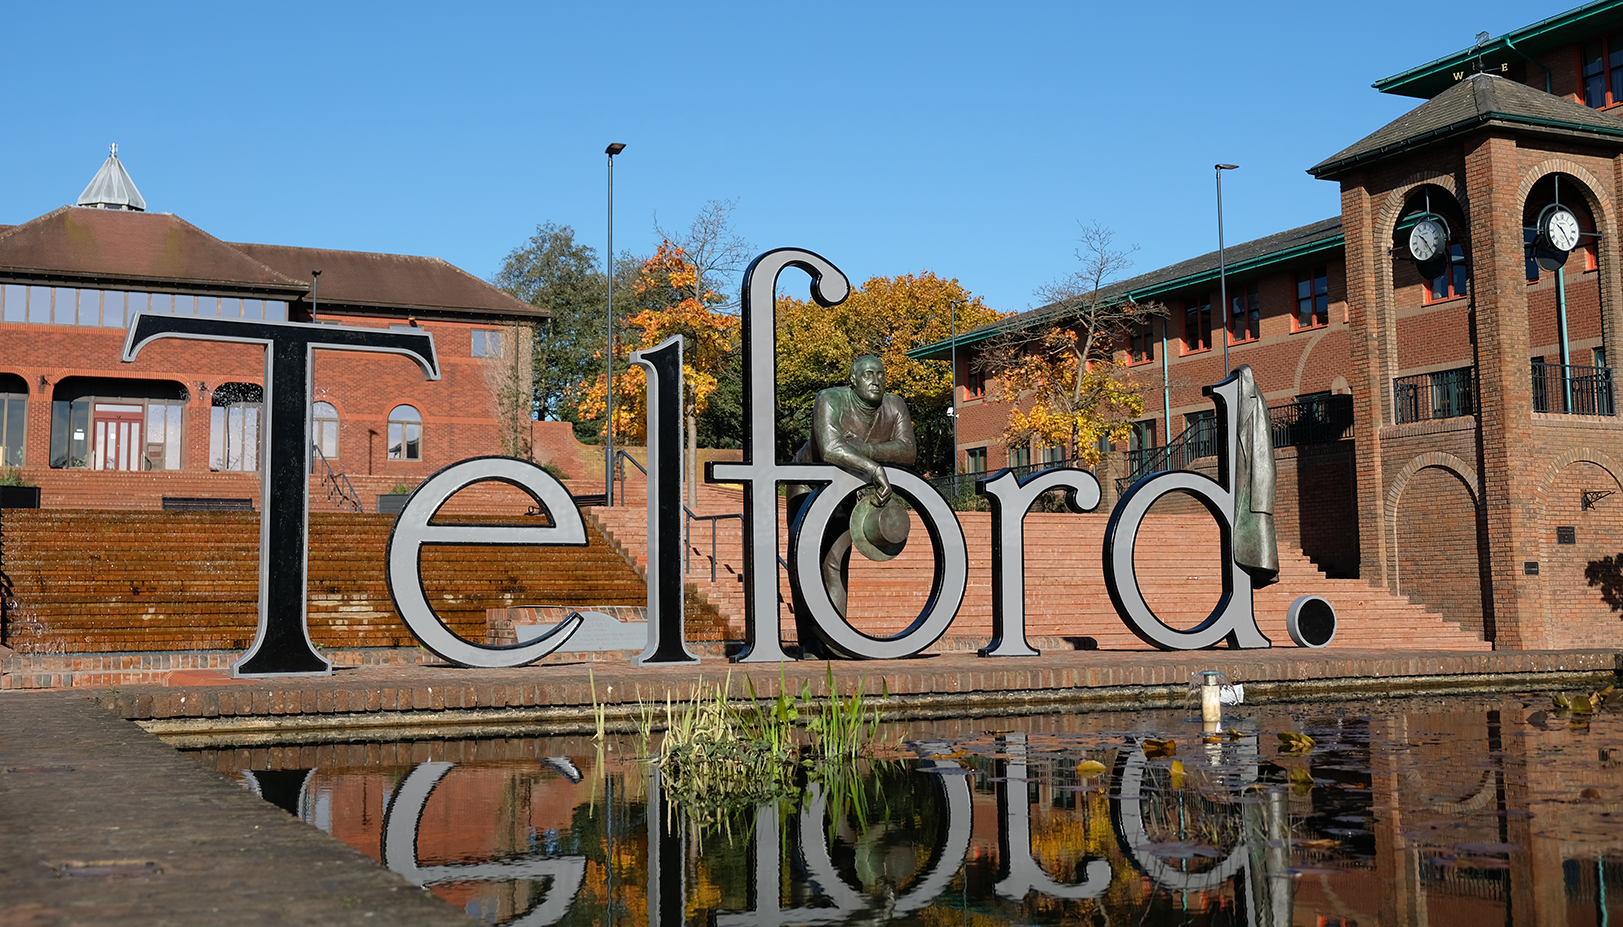 A photograph of the Telford sign and statue